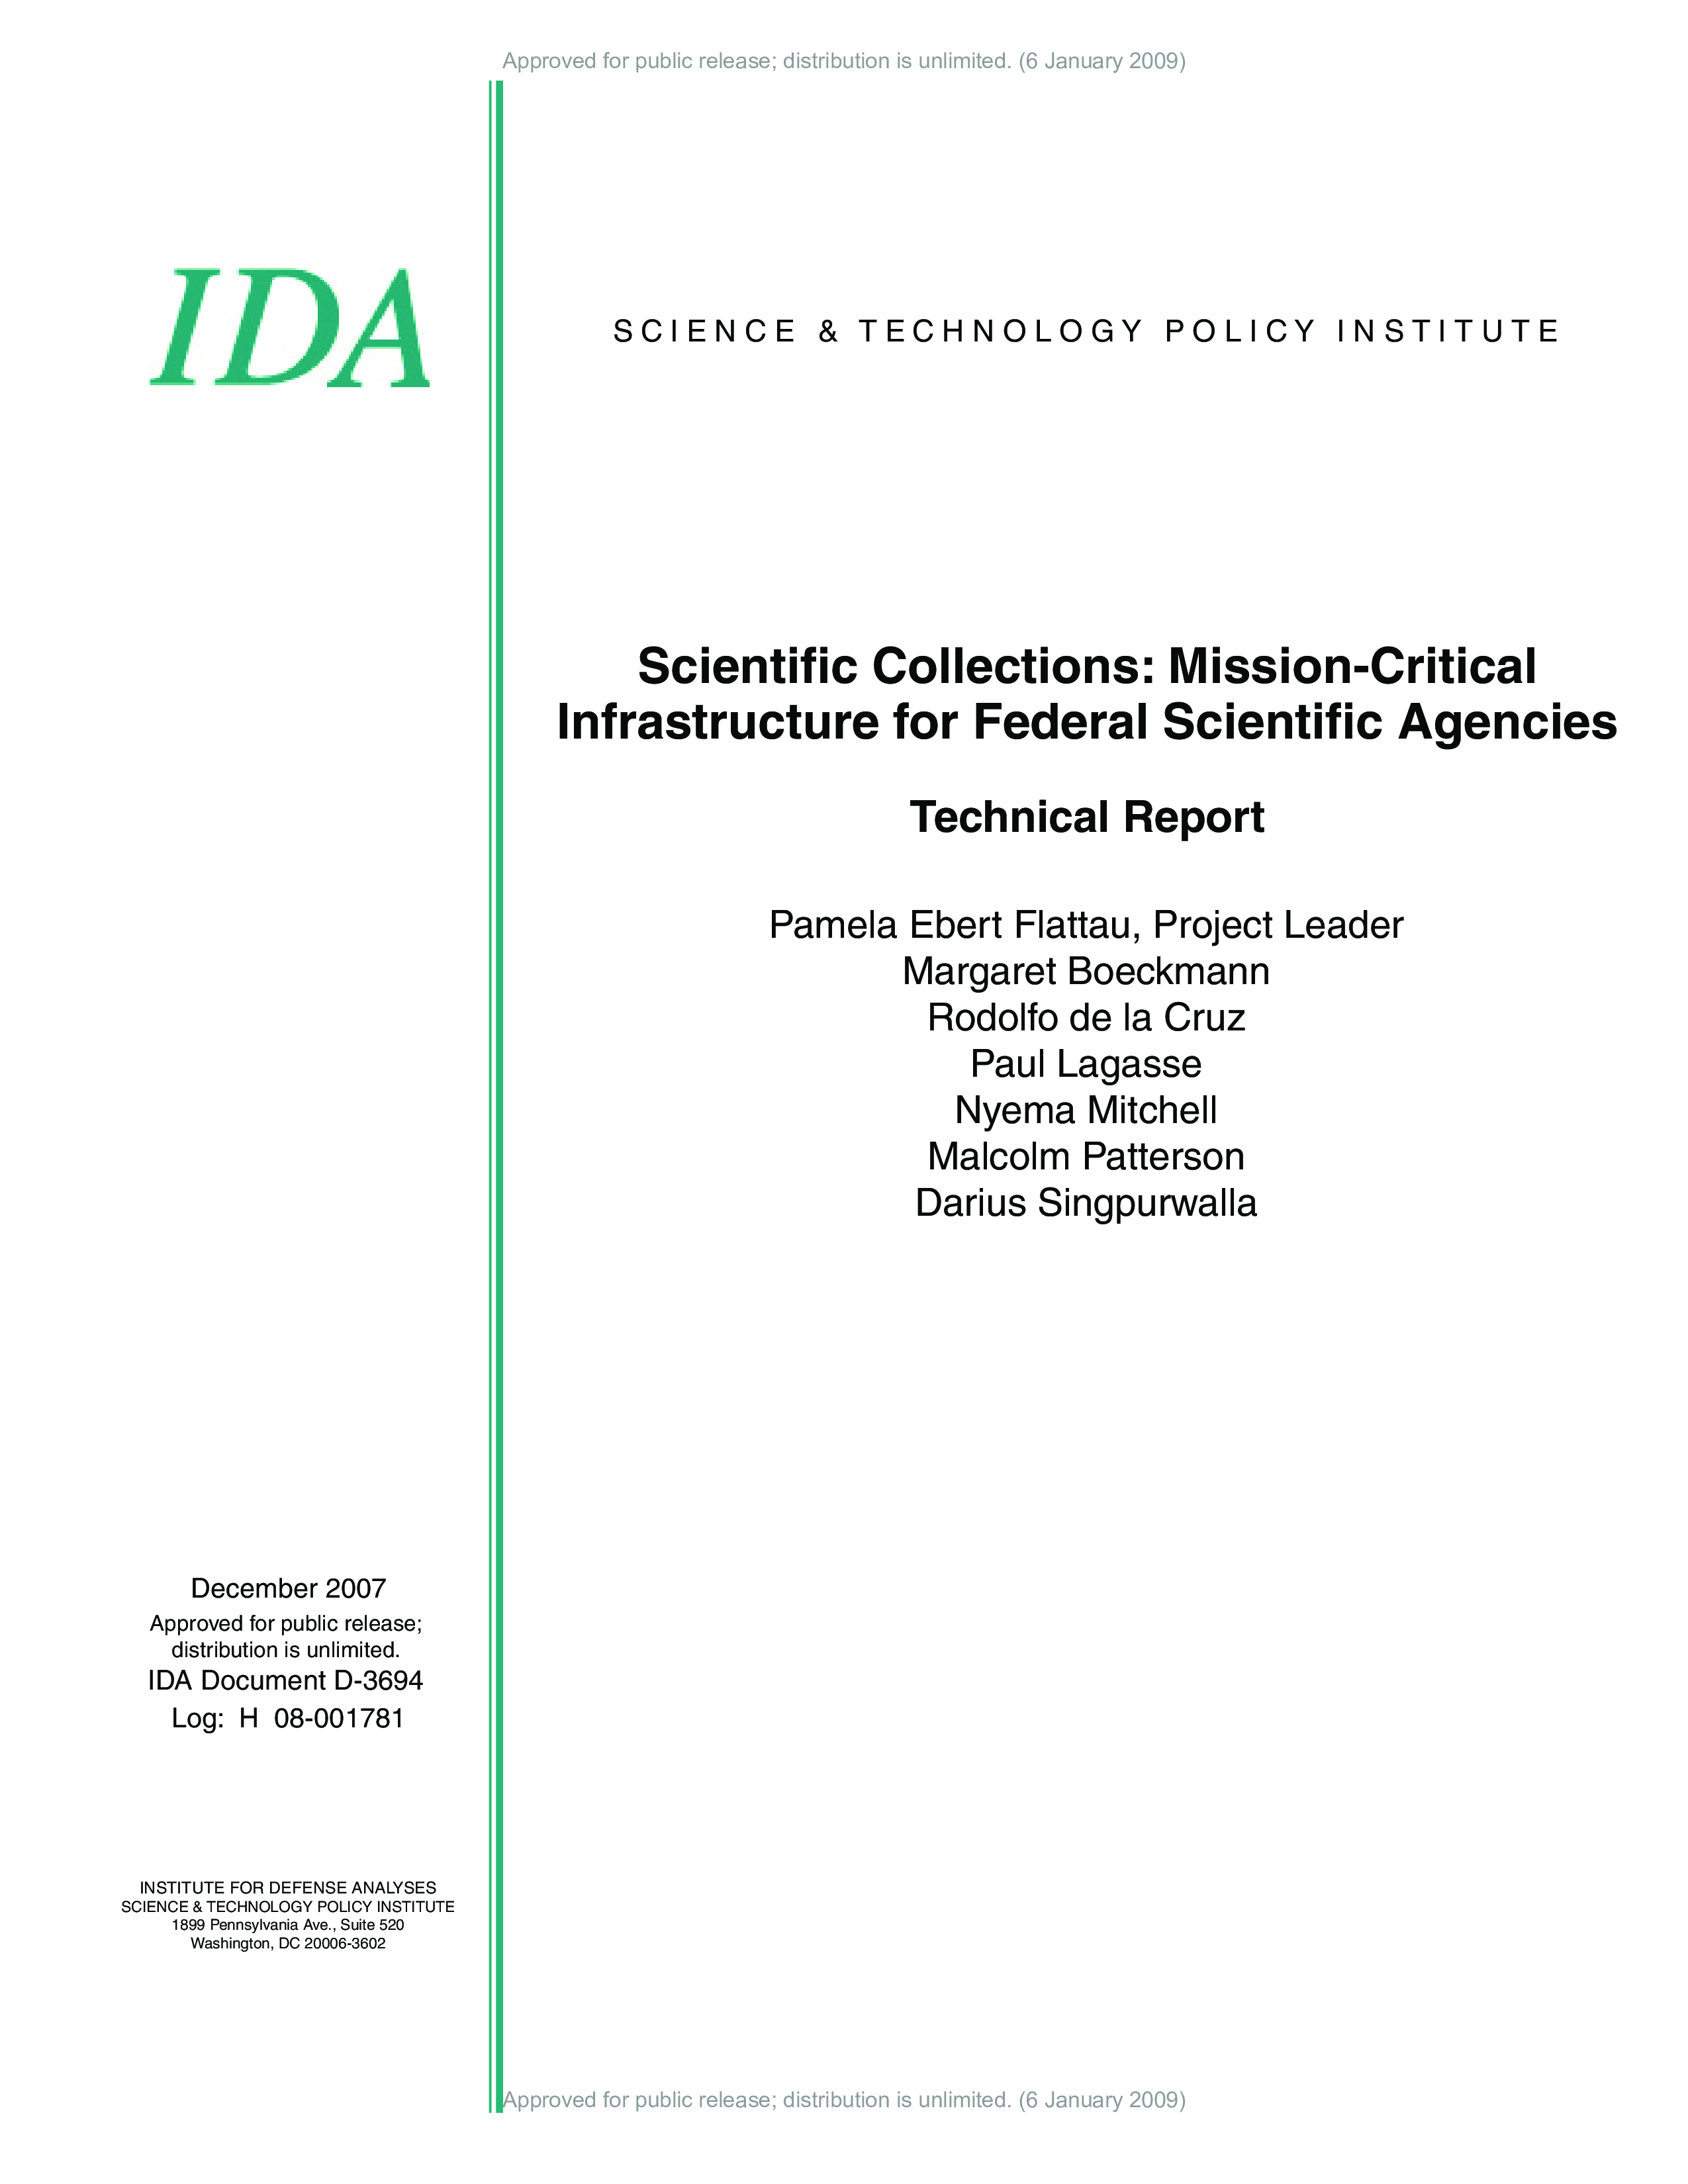 Scientific Collections: Mission-Critical Infrastructure for Federal Scientific Agencies: Technical Report cover image